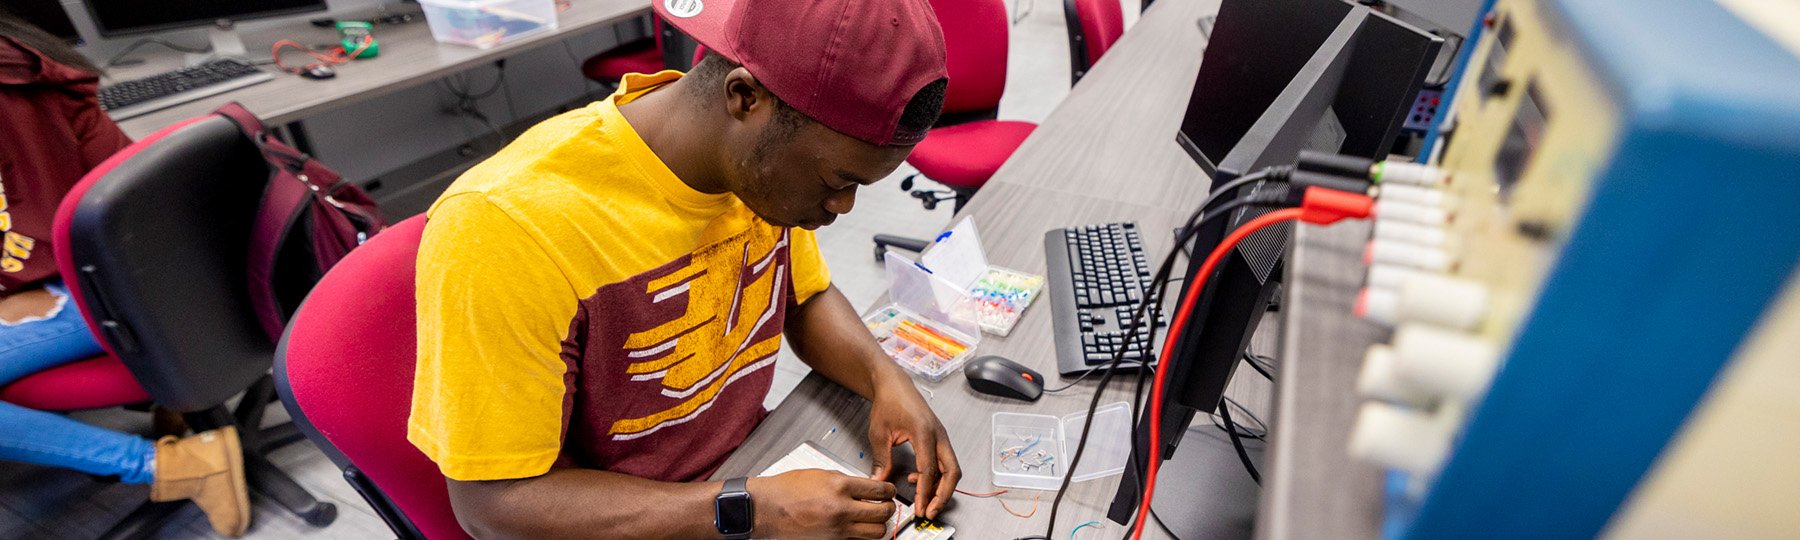 Electrical engineering major in a CMU shirt and hat working on a circuit board in front of electrical equipment.